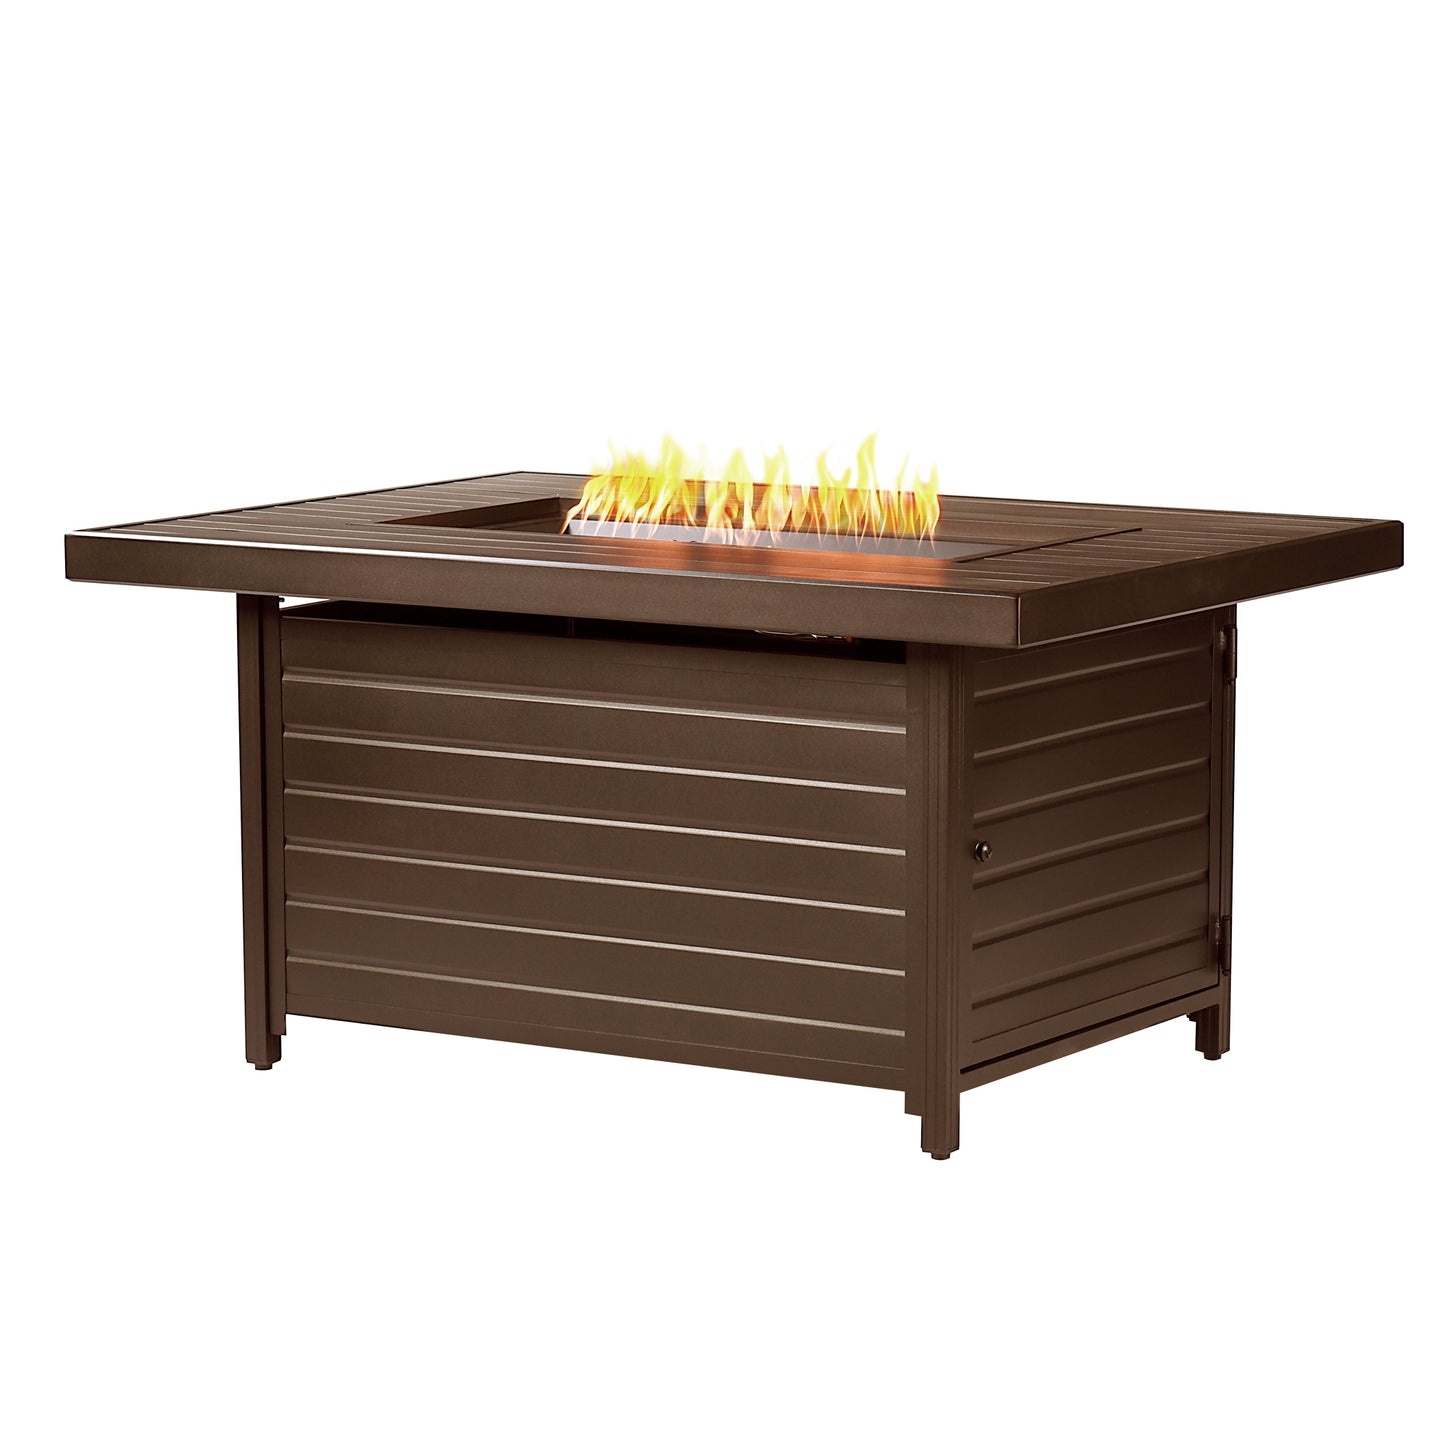 Aluminum 48-in Rectangular Propane Fire Table, Beads, Covers and Lid